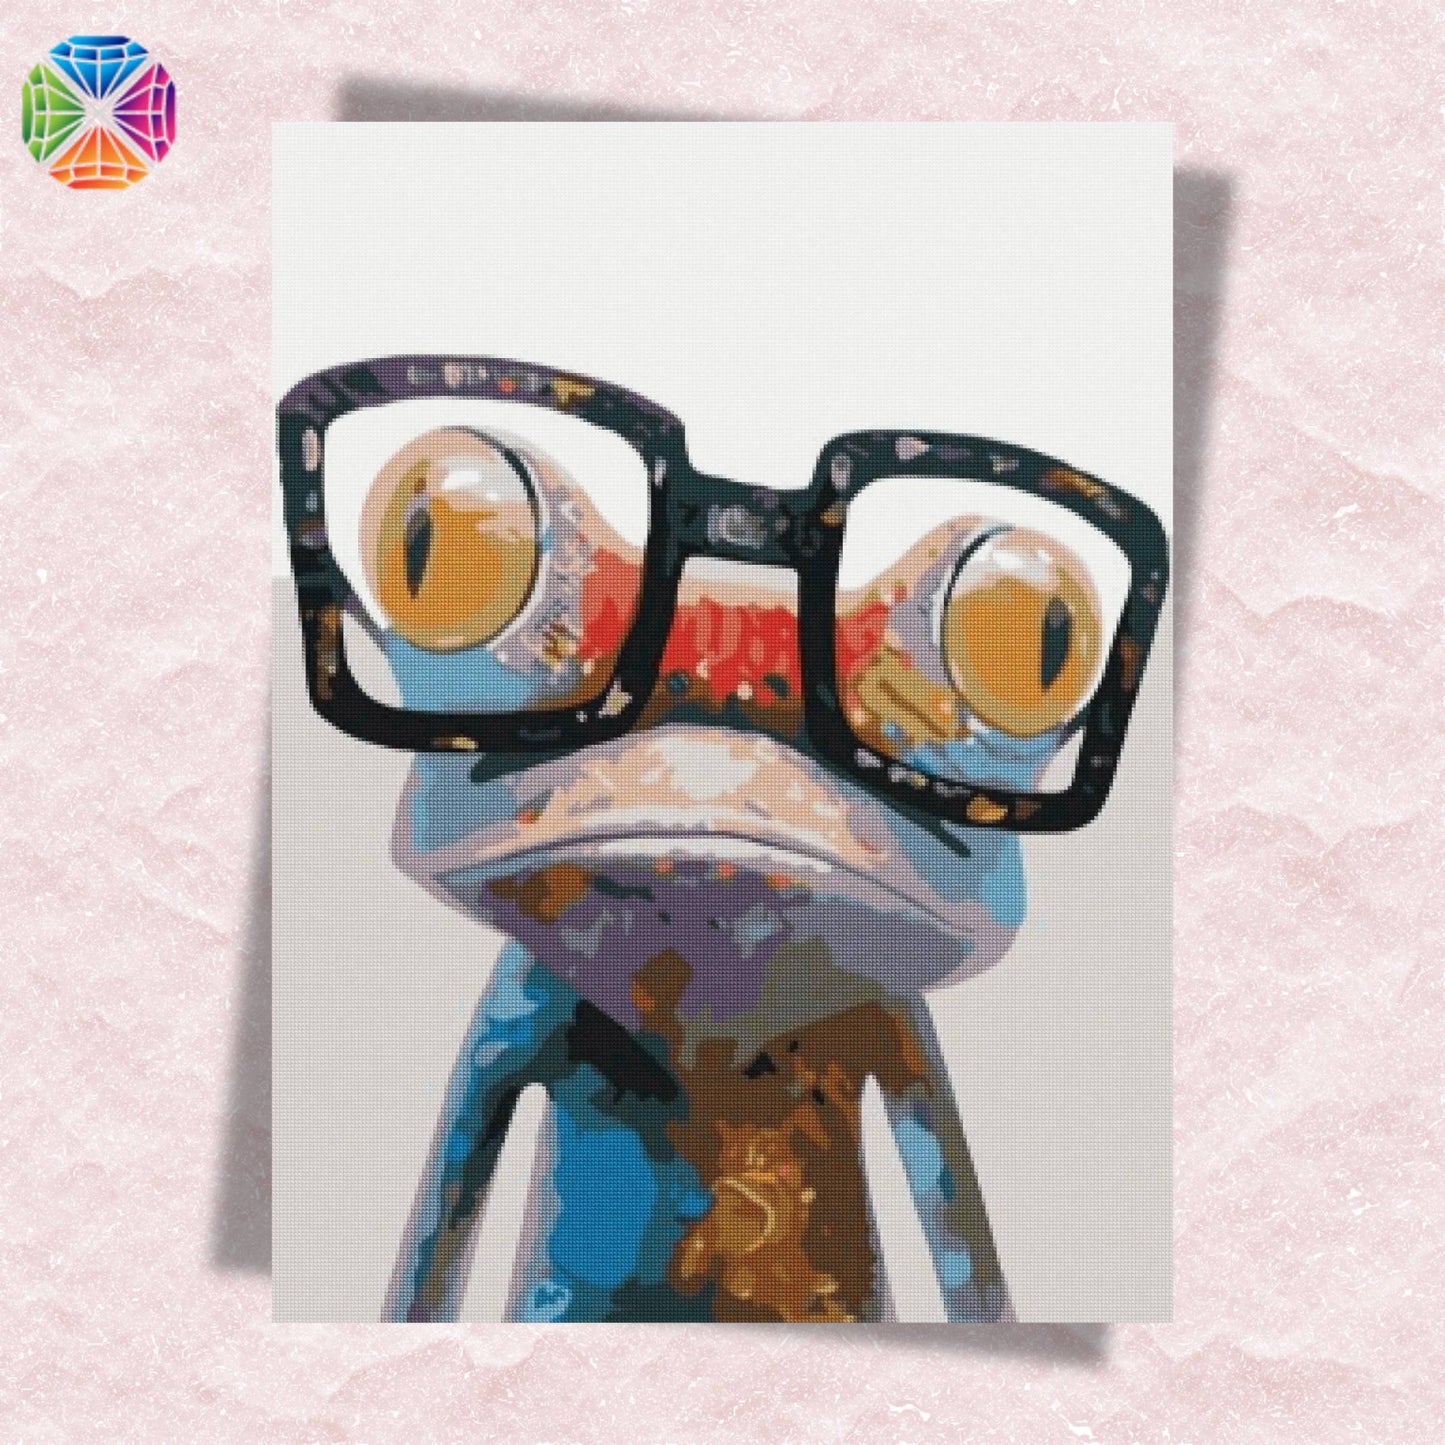 Frog with Glasses - Diamond Painting